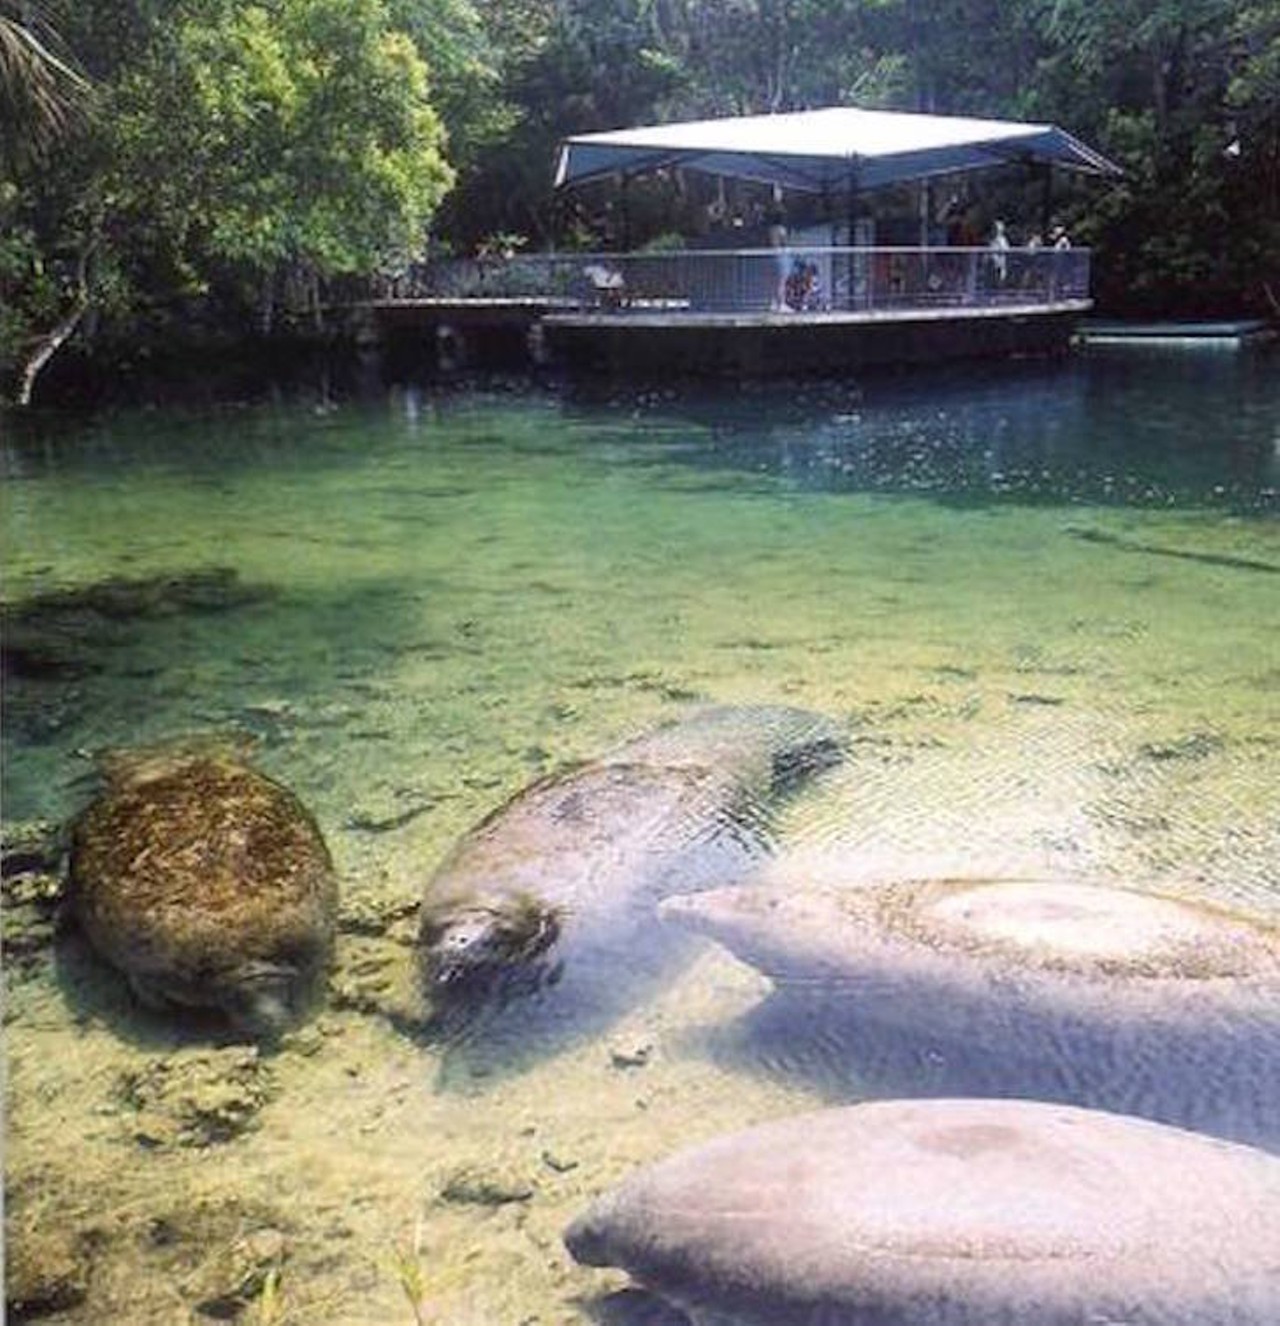 Ellie Schiller Homosassa Springs Wildlife State Park
4150 S Suncoast Blvd., Homosassa | 352-628-5343
It&#146;s easy to forget that the manatees in this park are seen all year round amidst the picnicking, bird-watching and hiking you&#146;ll probably be doing. Manatee programs are run three times a day, making them pretty hard to miss.
Photo via Delia Blankenship Pittman/Facebook